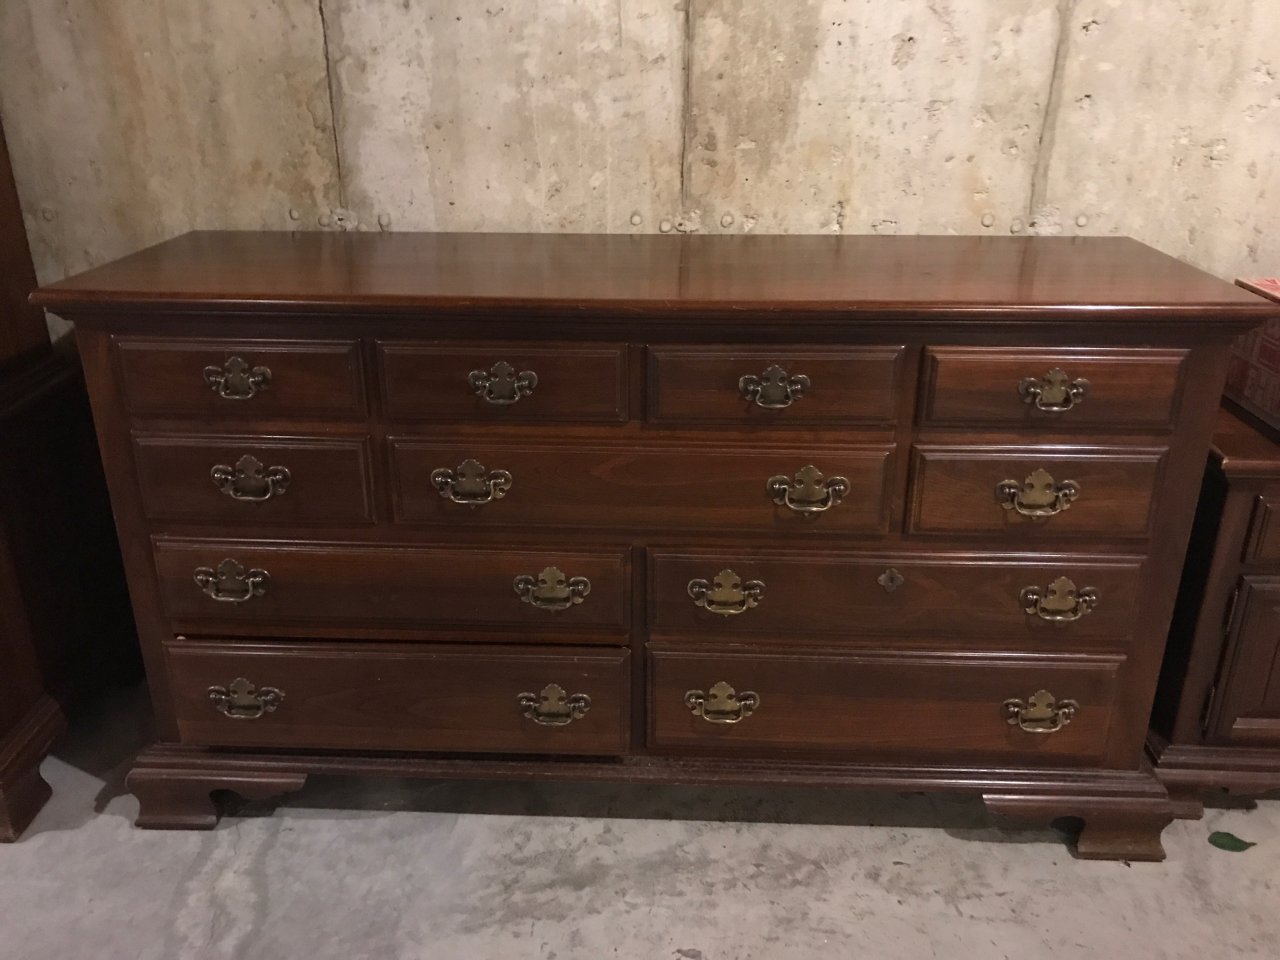 Thomas P. Beals Full Bedroom Set | My Antique Furniture Collection